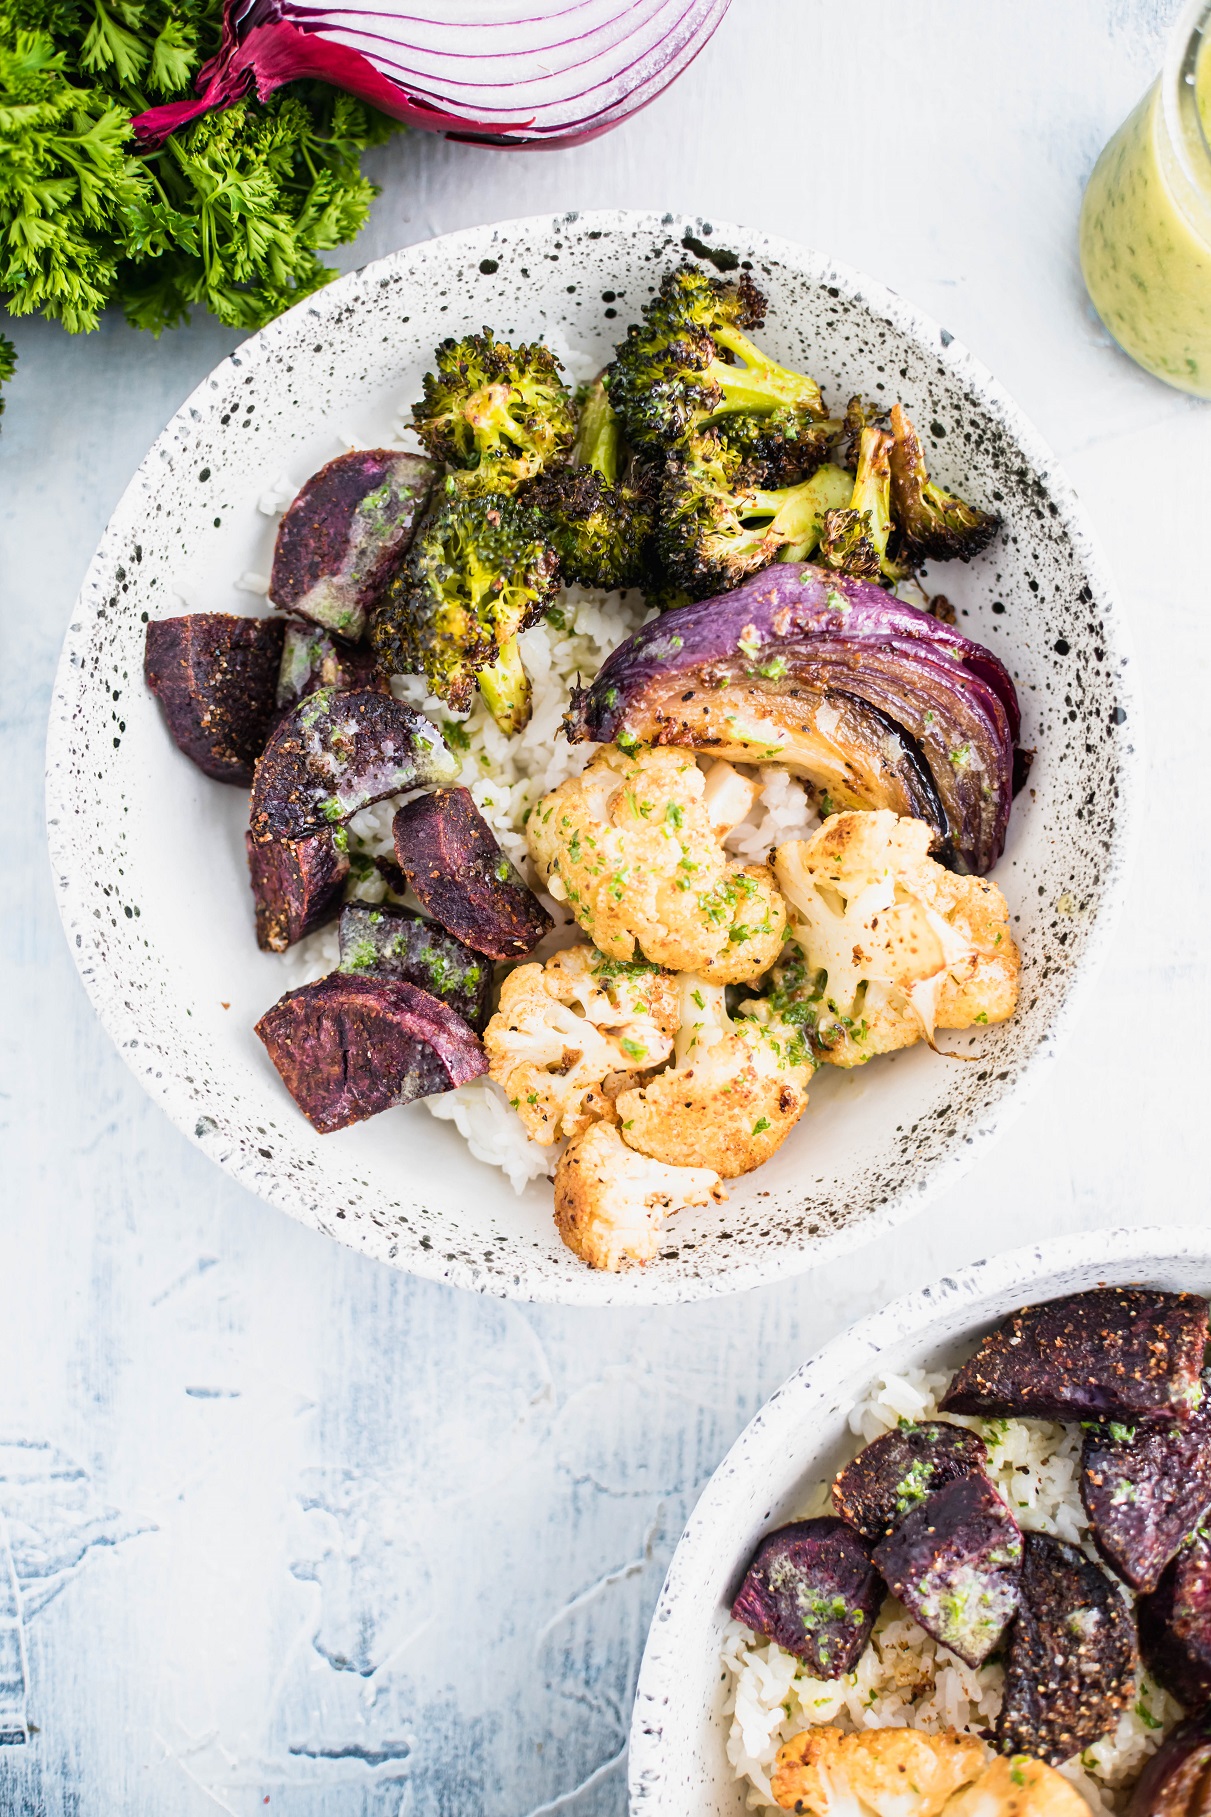 White bowl with black speckles filled with white rice that is topped with roasted broccoli, cauliflower, purple sweet potato chunks and a quarter of a red onion. Drizzled with sauce.